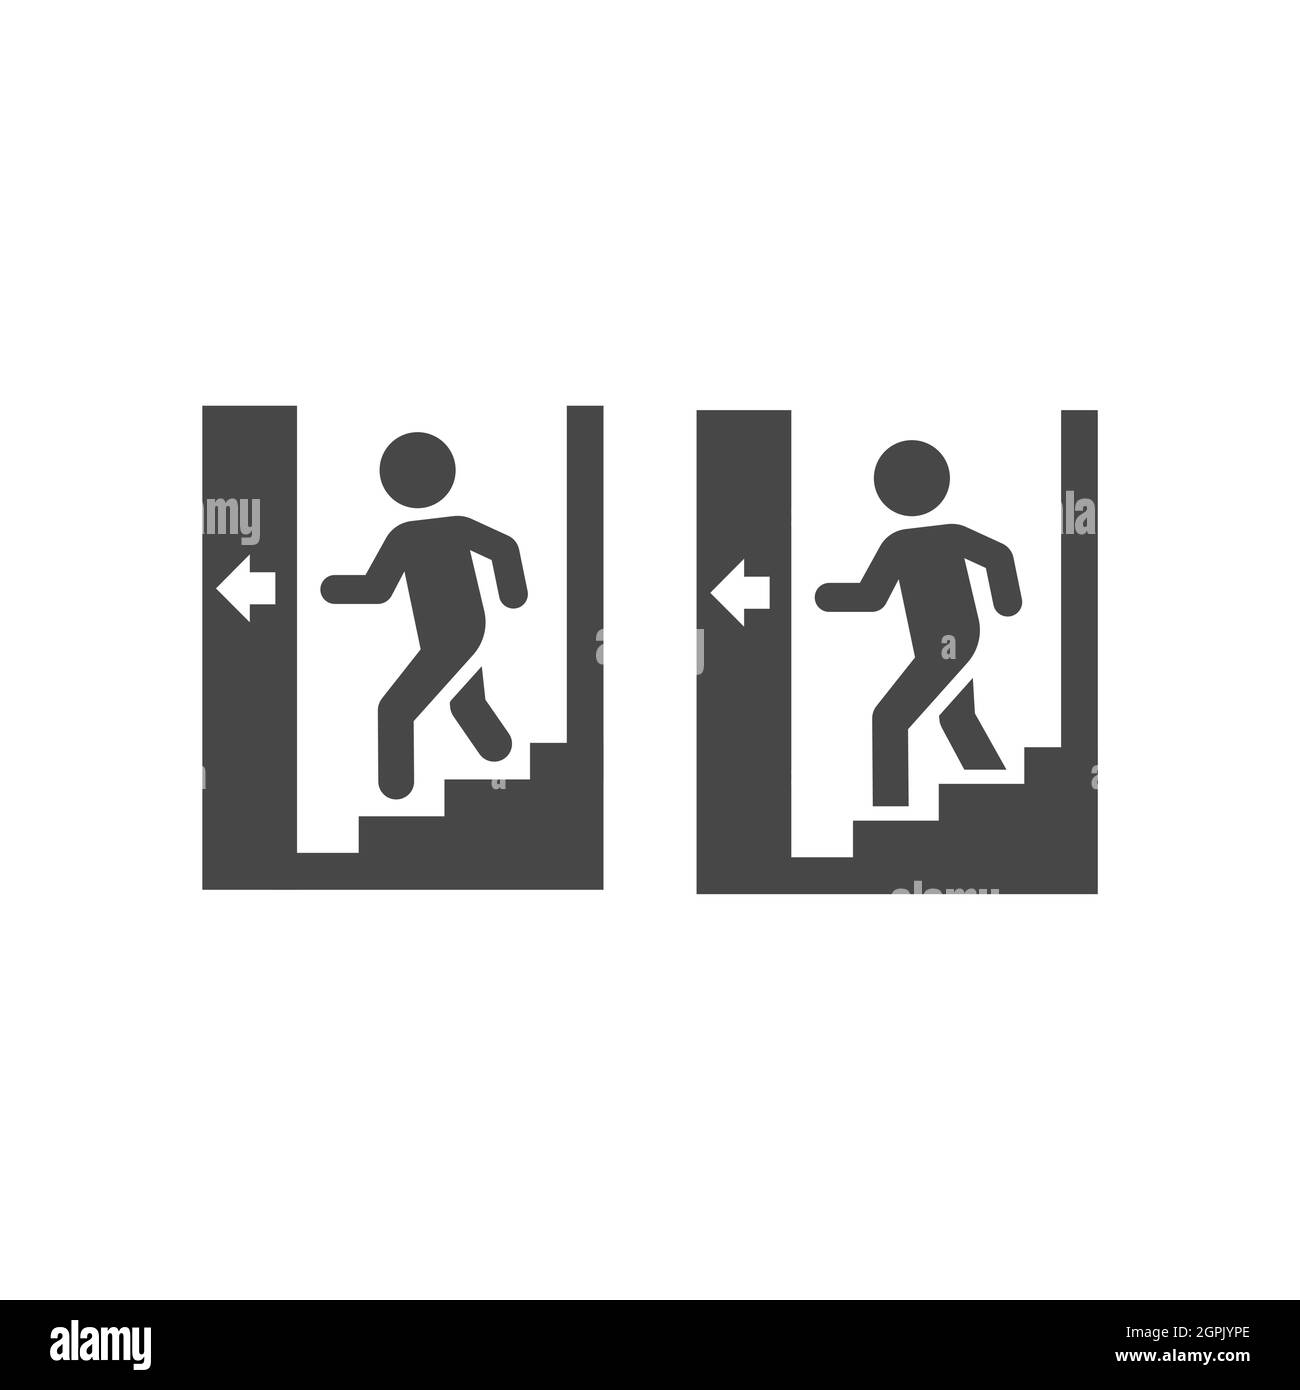 Man going down stairs black vector icon Stock Vector